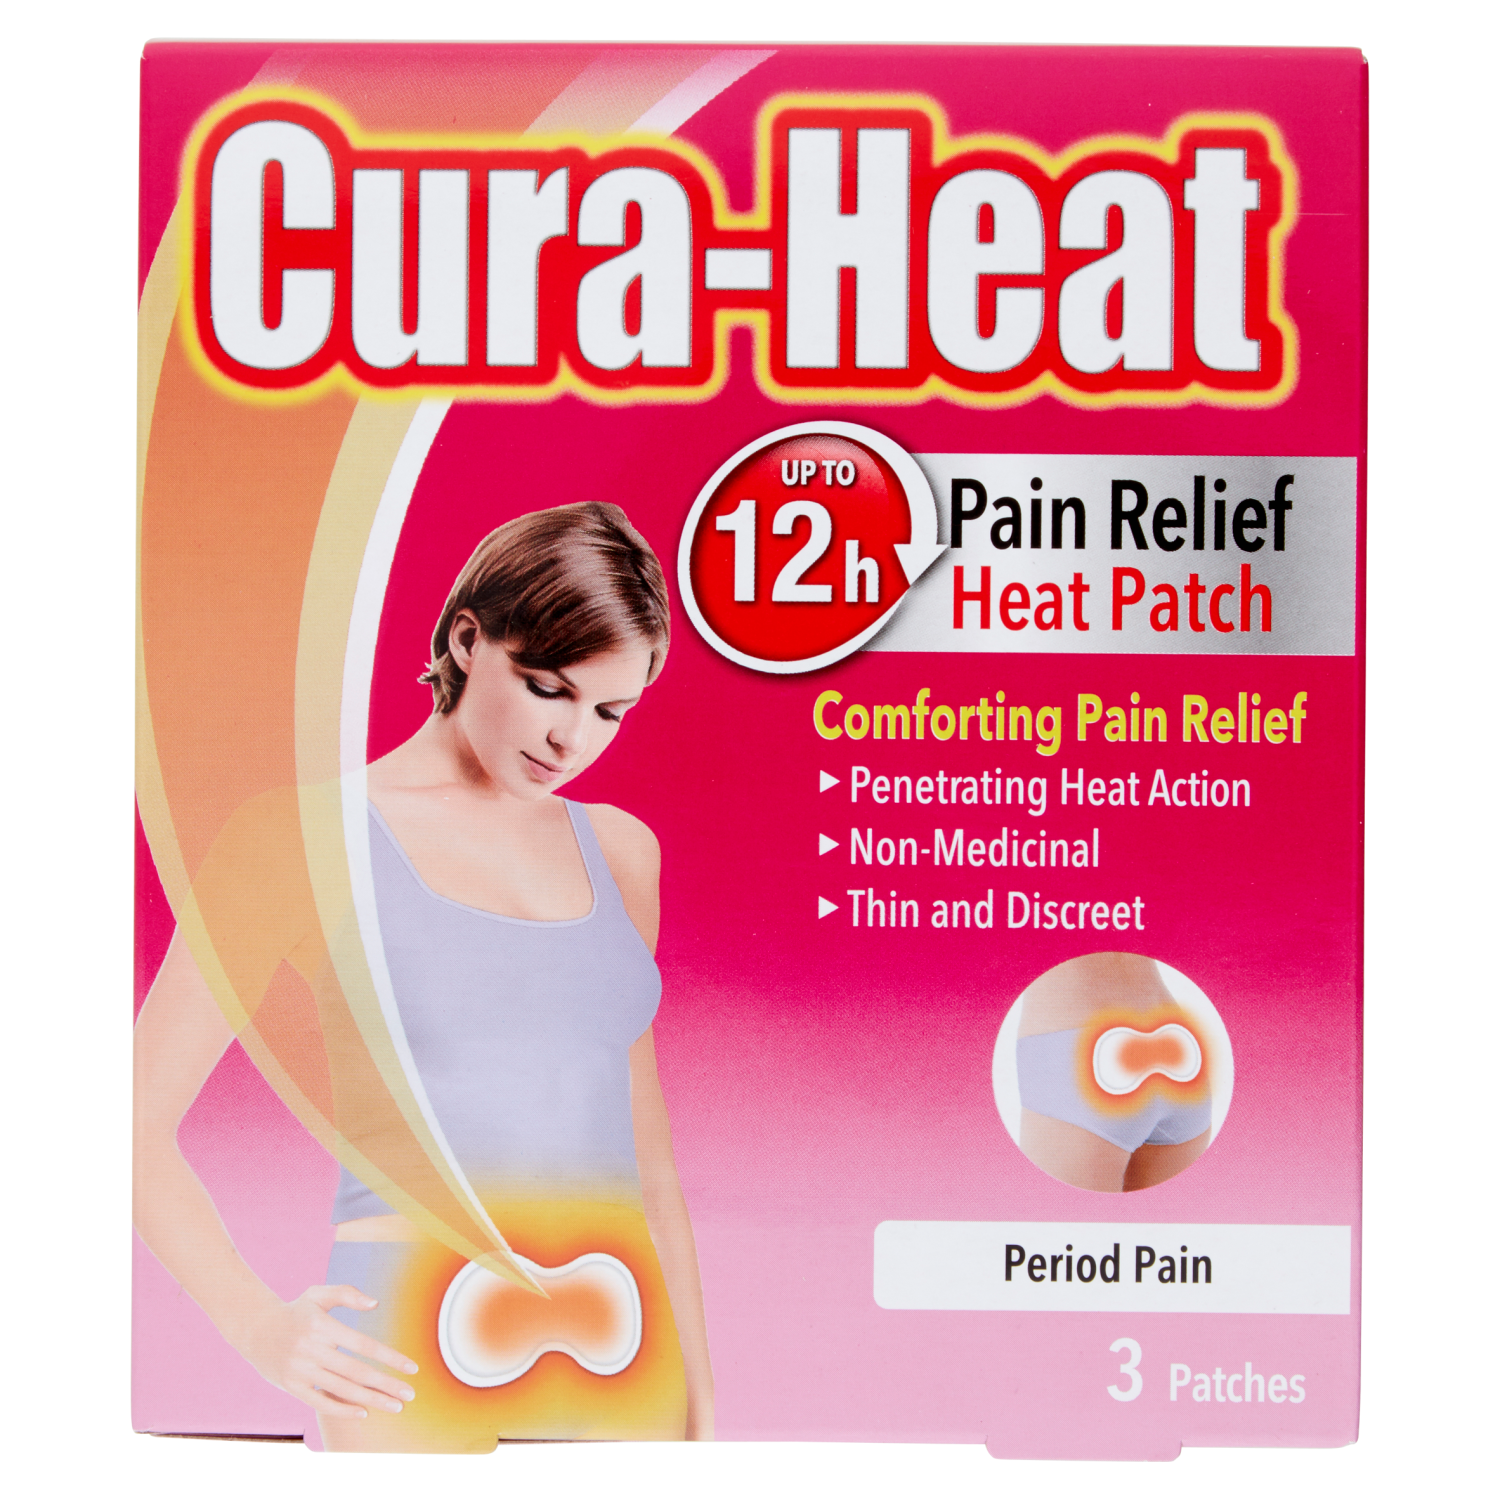 Cura-Heat Period Pain (3 Patches)